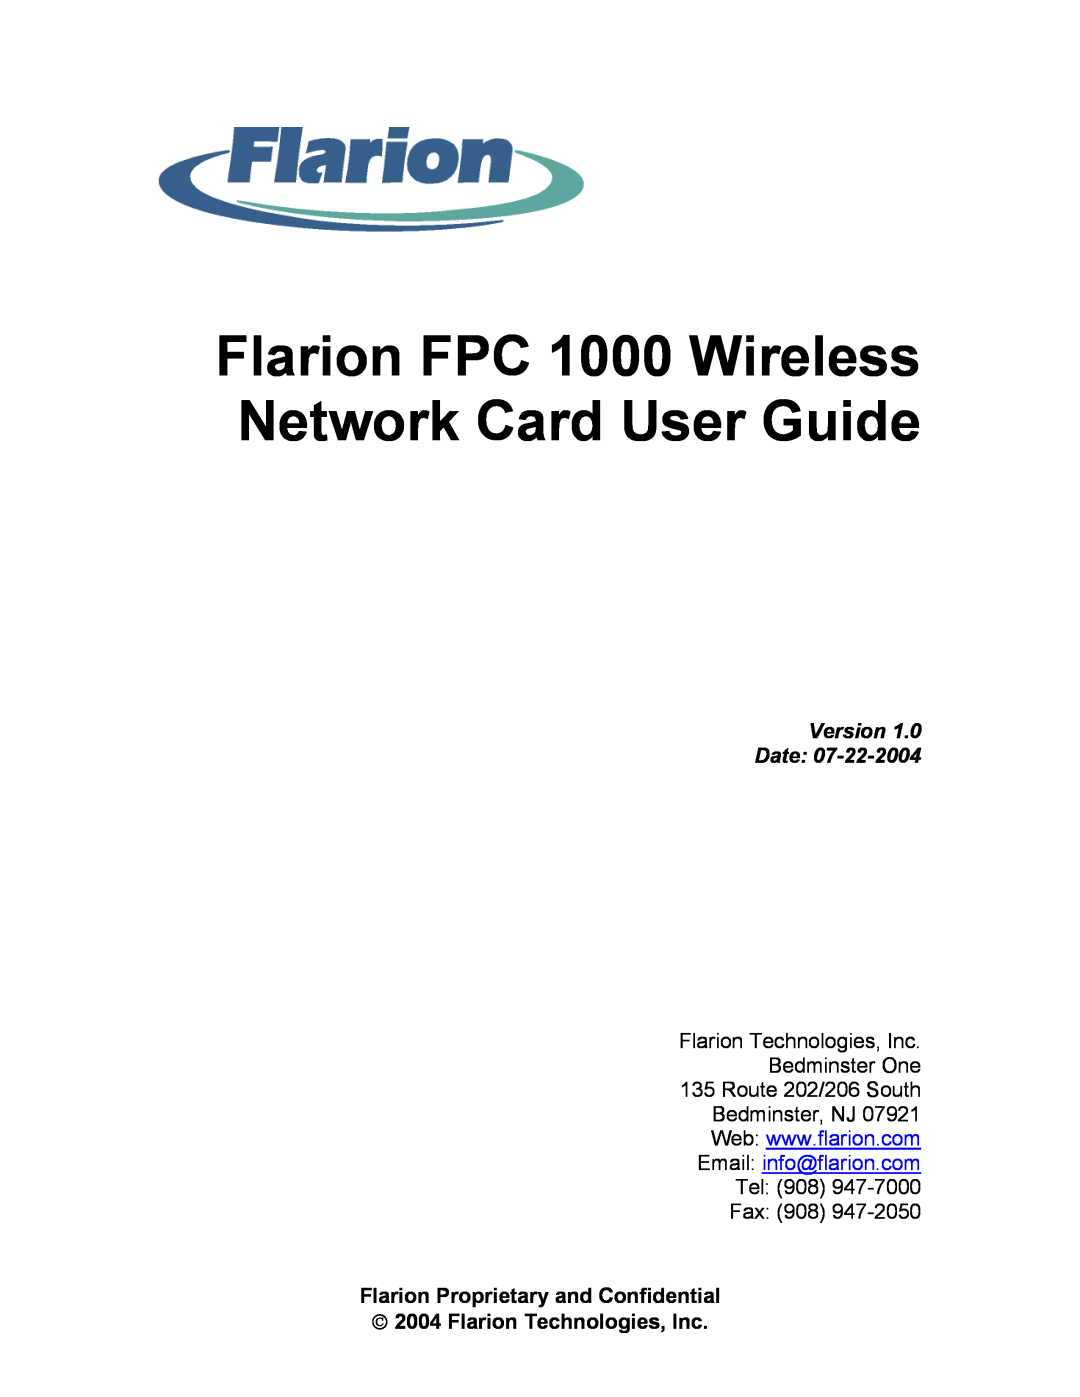 GE FPC 1000 manual Version Date, Flarion Proprietary and Confidential  2004 Flarion Technologies, Inc, Bedminster, NJ 